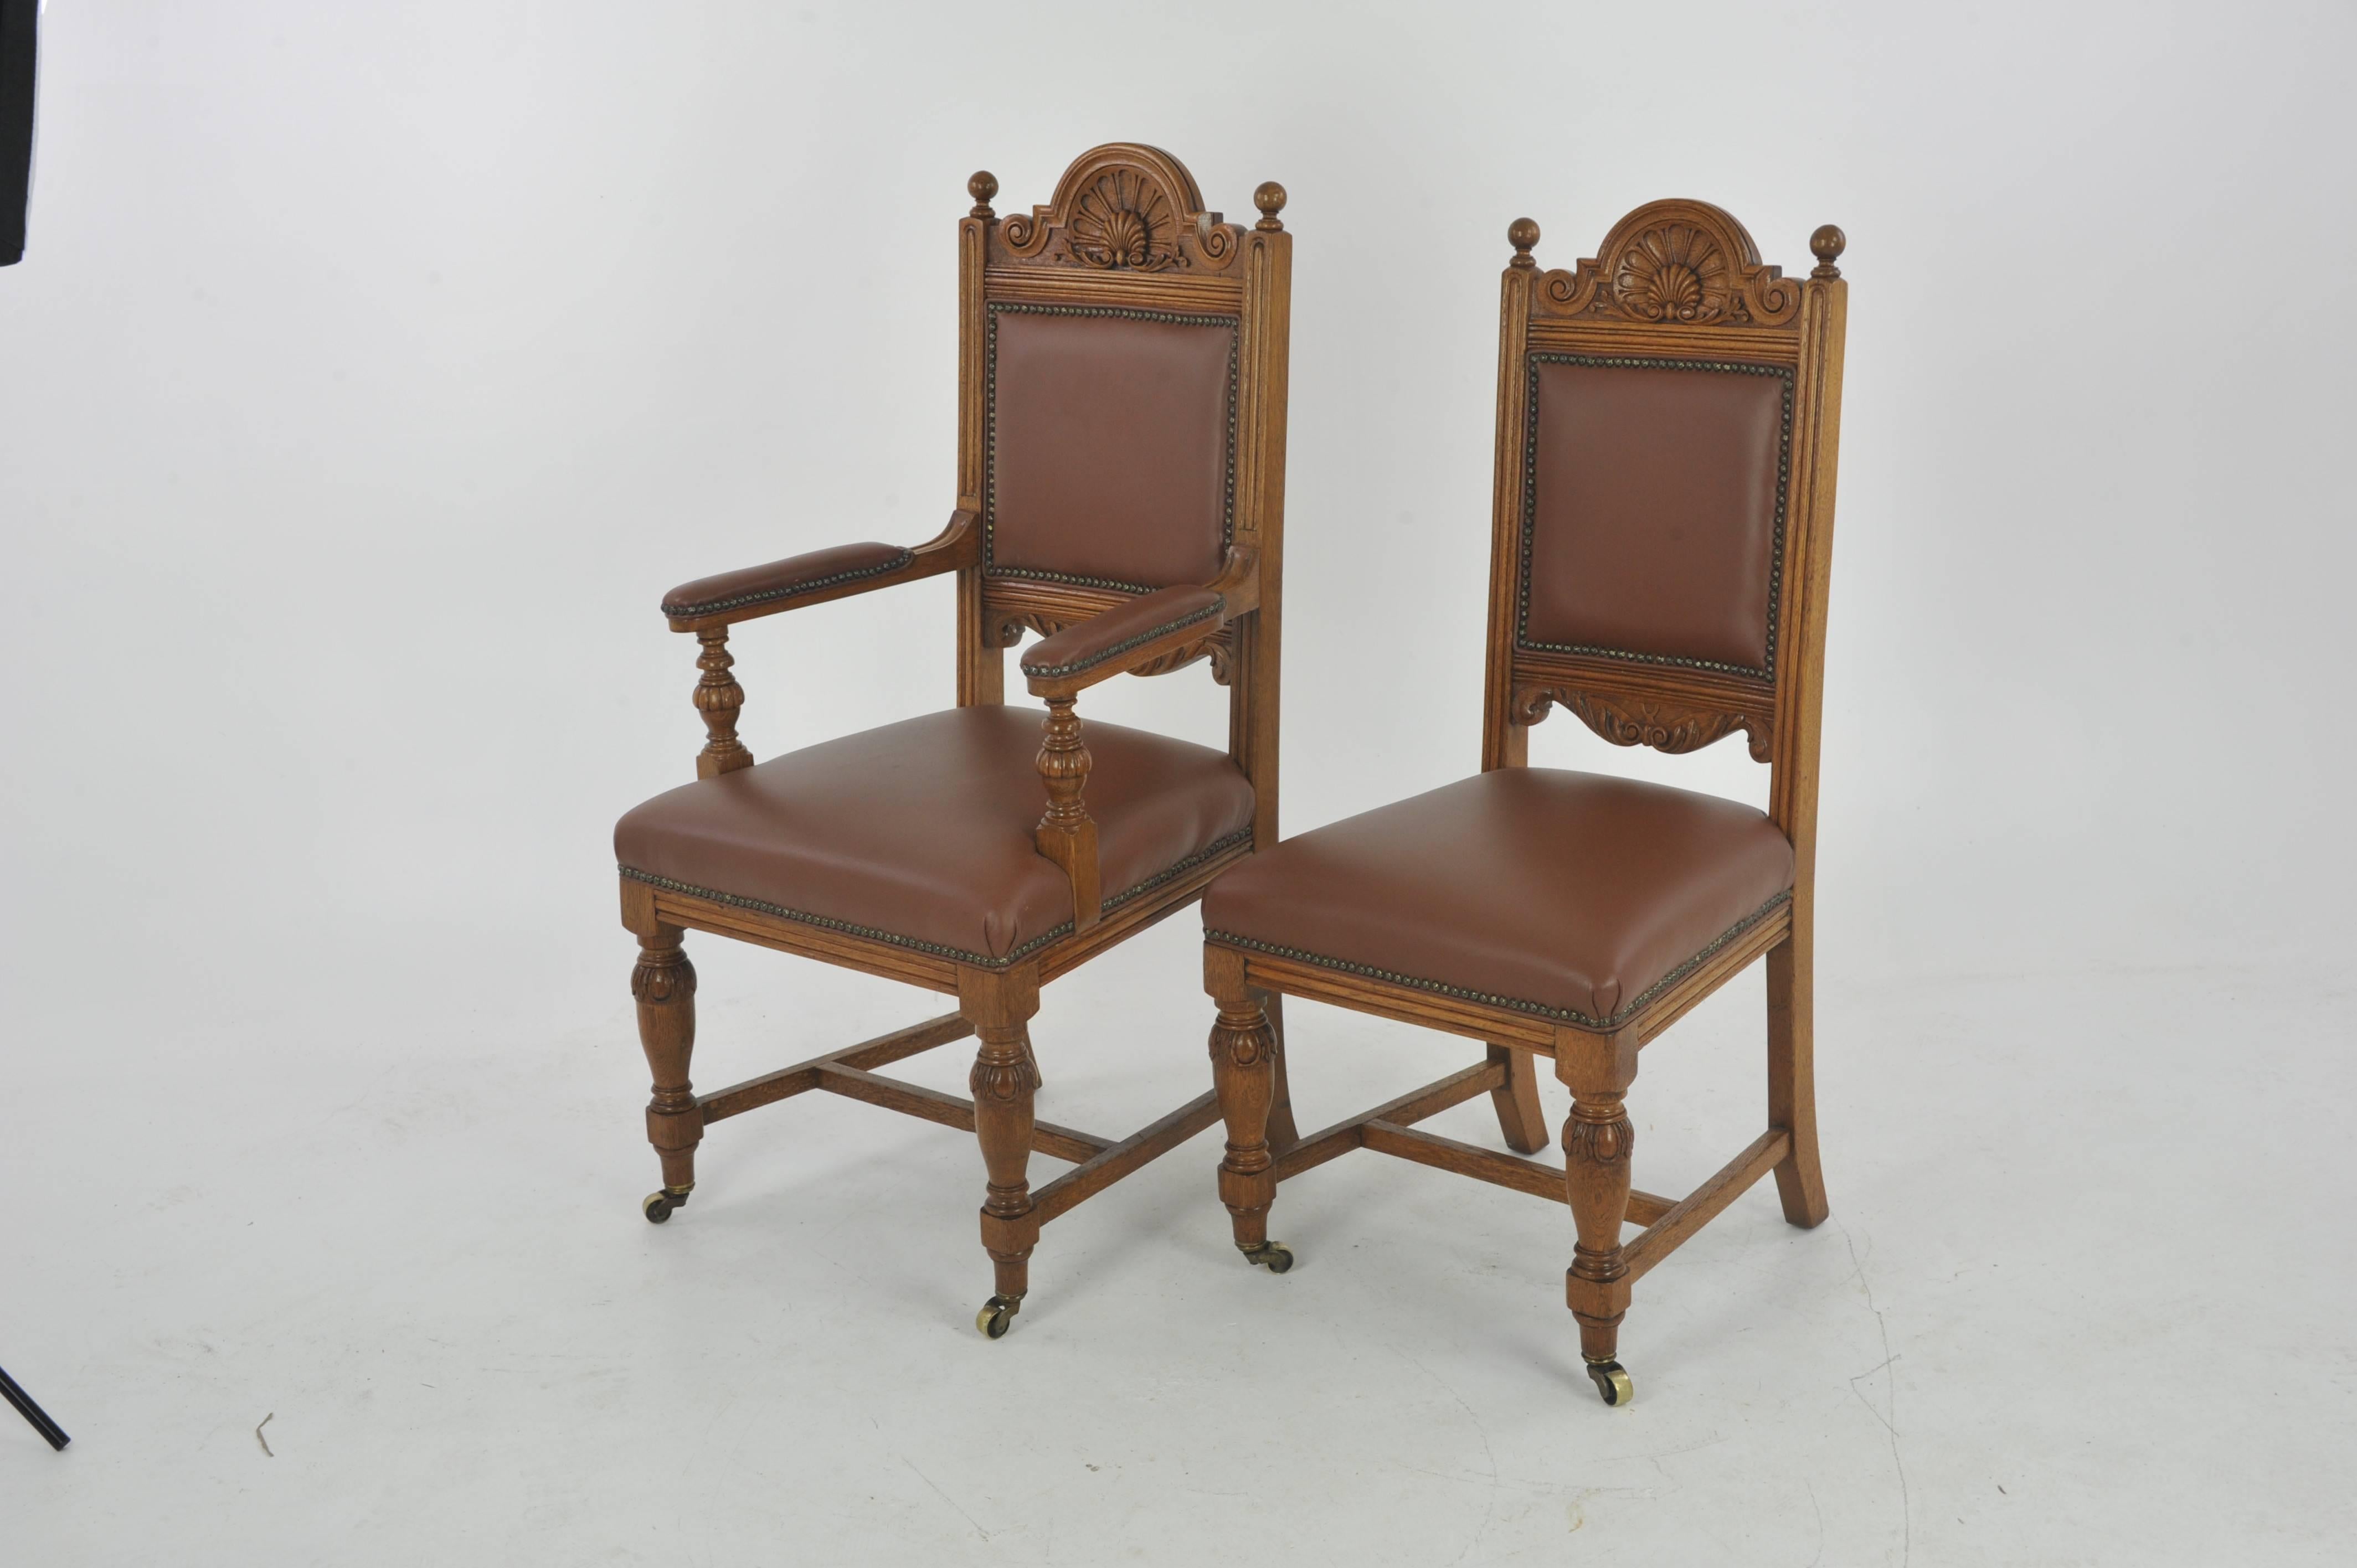 Antique dining chairs, carved oak, six chairs (5+1), Scotland, 1880, B1126.

Scotland, 1880.
Solid oak construction
Original finish
Five single and one armchair
Carved crest rail above
Padded back with vinyl upholstery
Upholstered